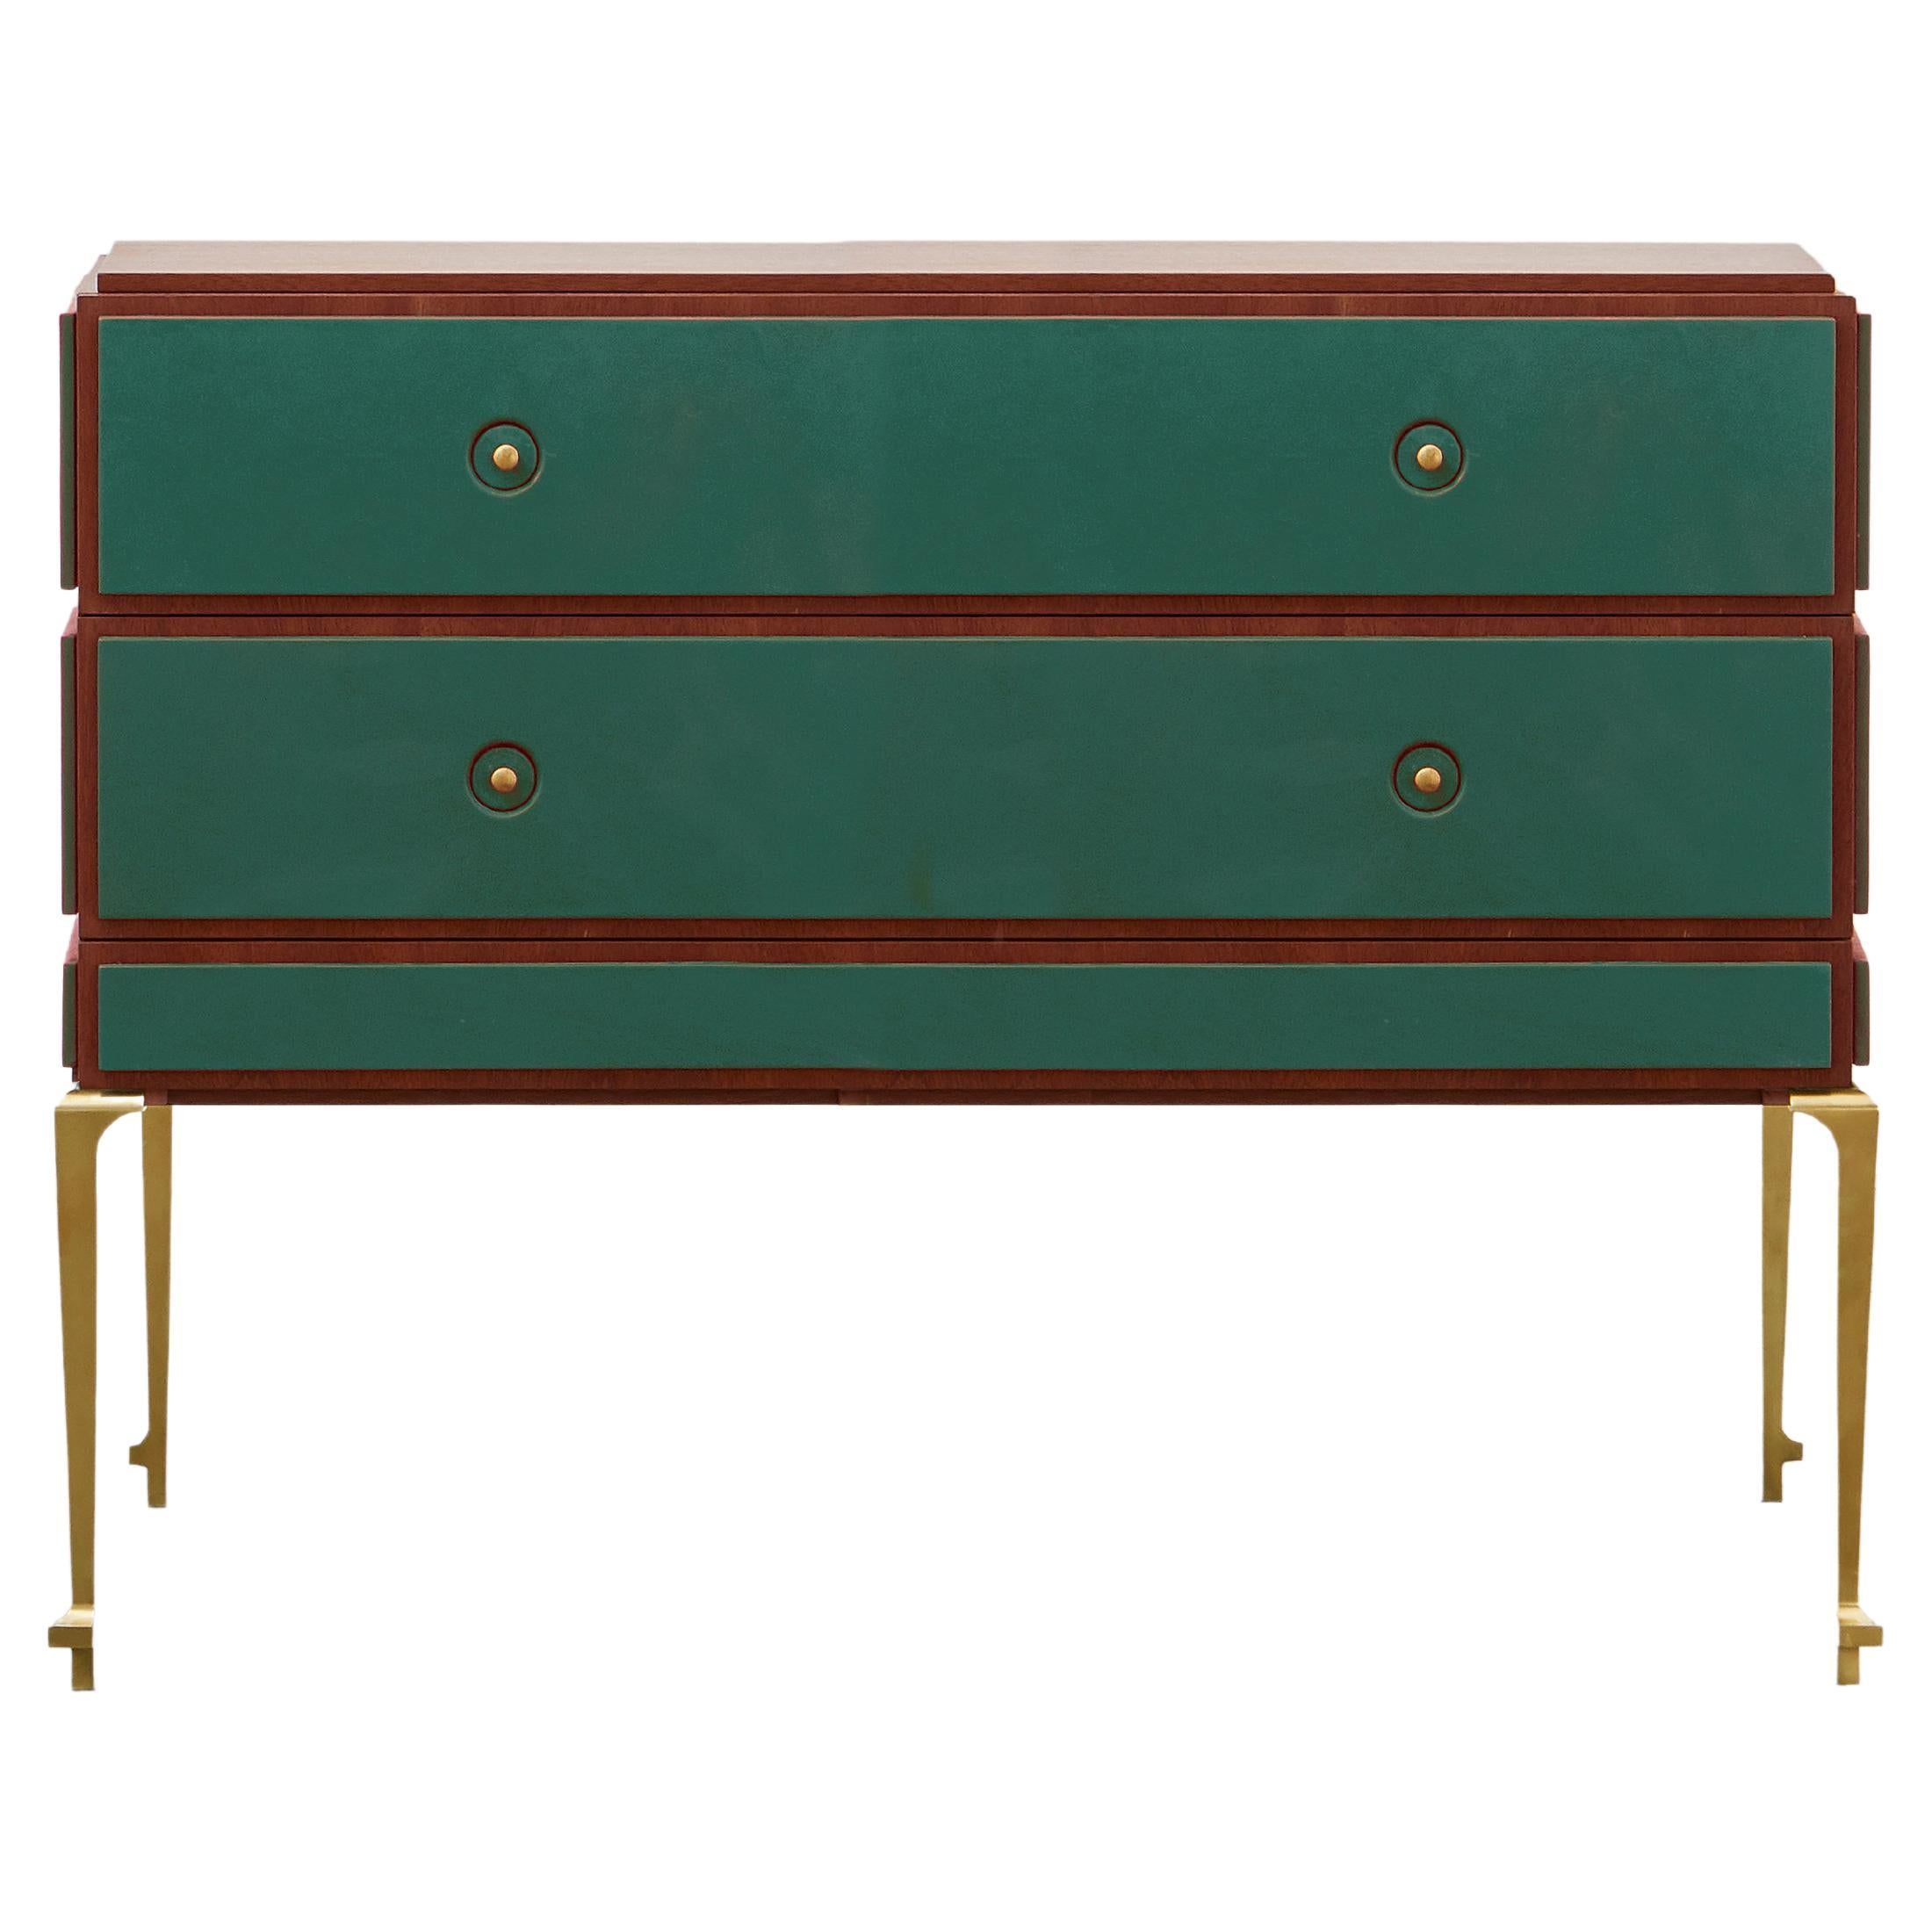 PH Grand Chest of Drawers, Mahogany, Emerald Green Leather Panels, Brass Legs For Sale